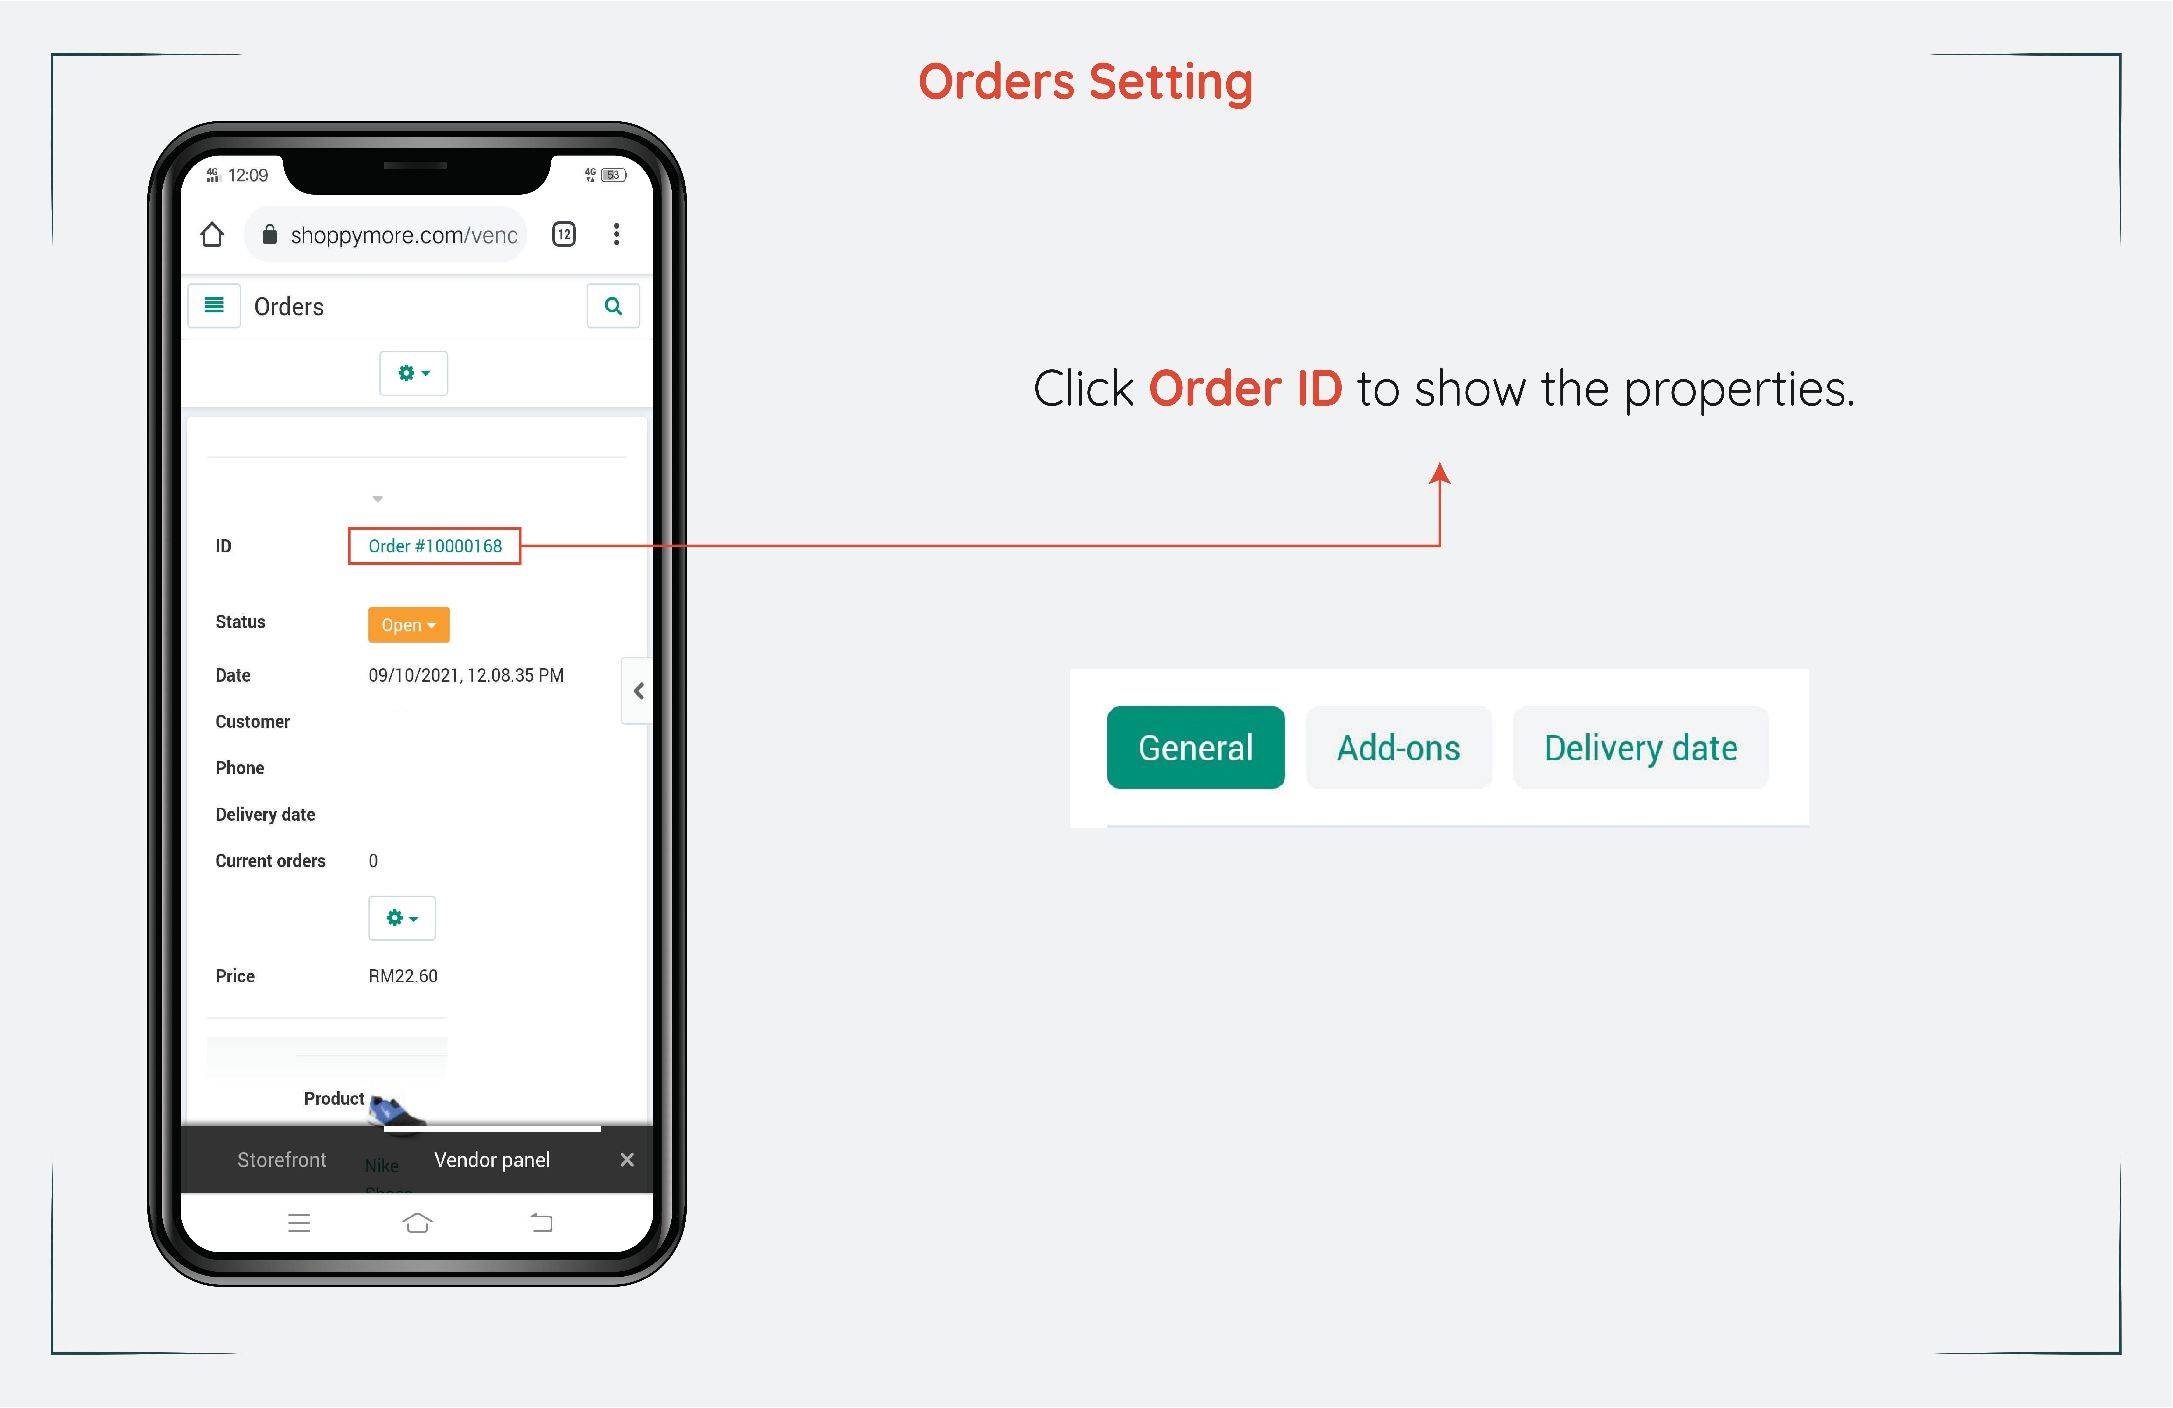 How to use Citylink order handling using mobile 3